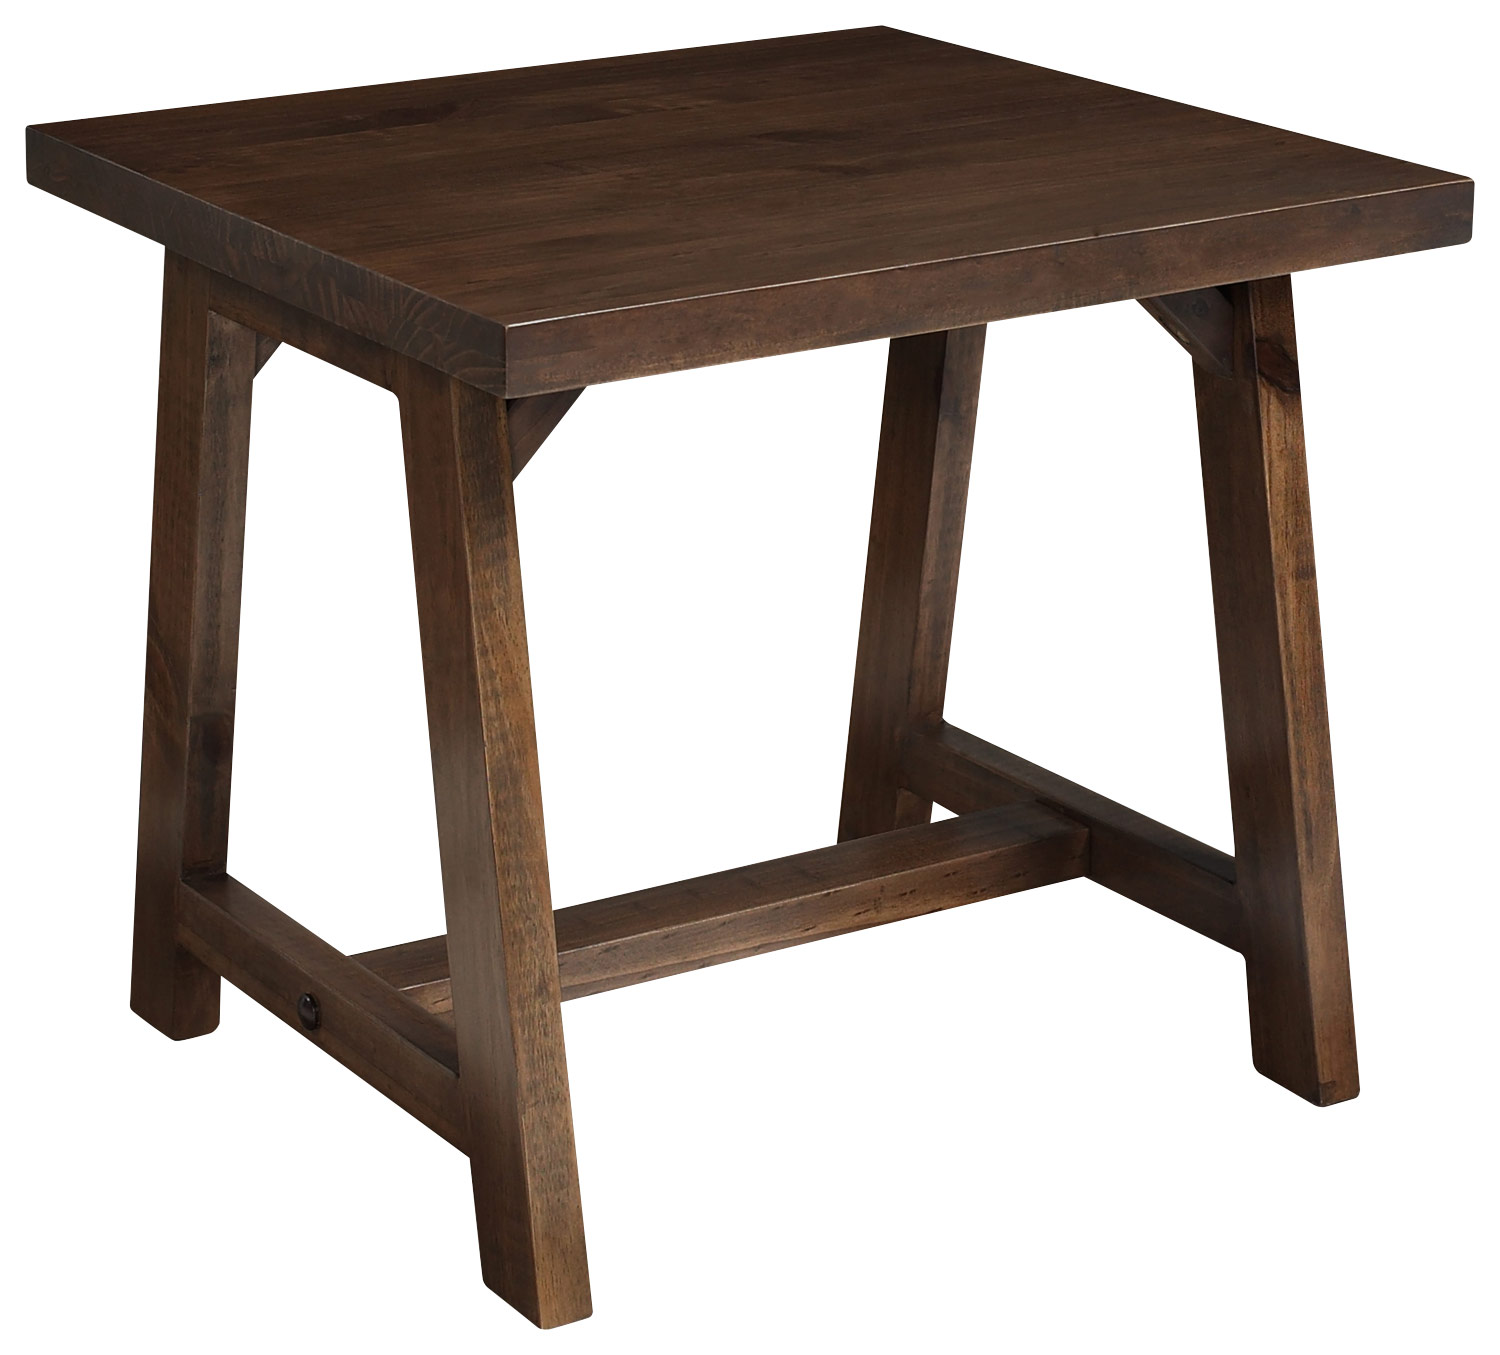 Simpli Home - Sawhorse Square Solid Pine End Table - Medium Saddle-Brown was $105.99 now $73.99 (30.0% off)